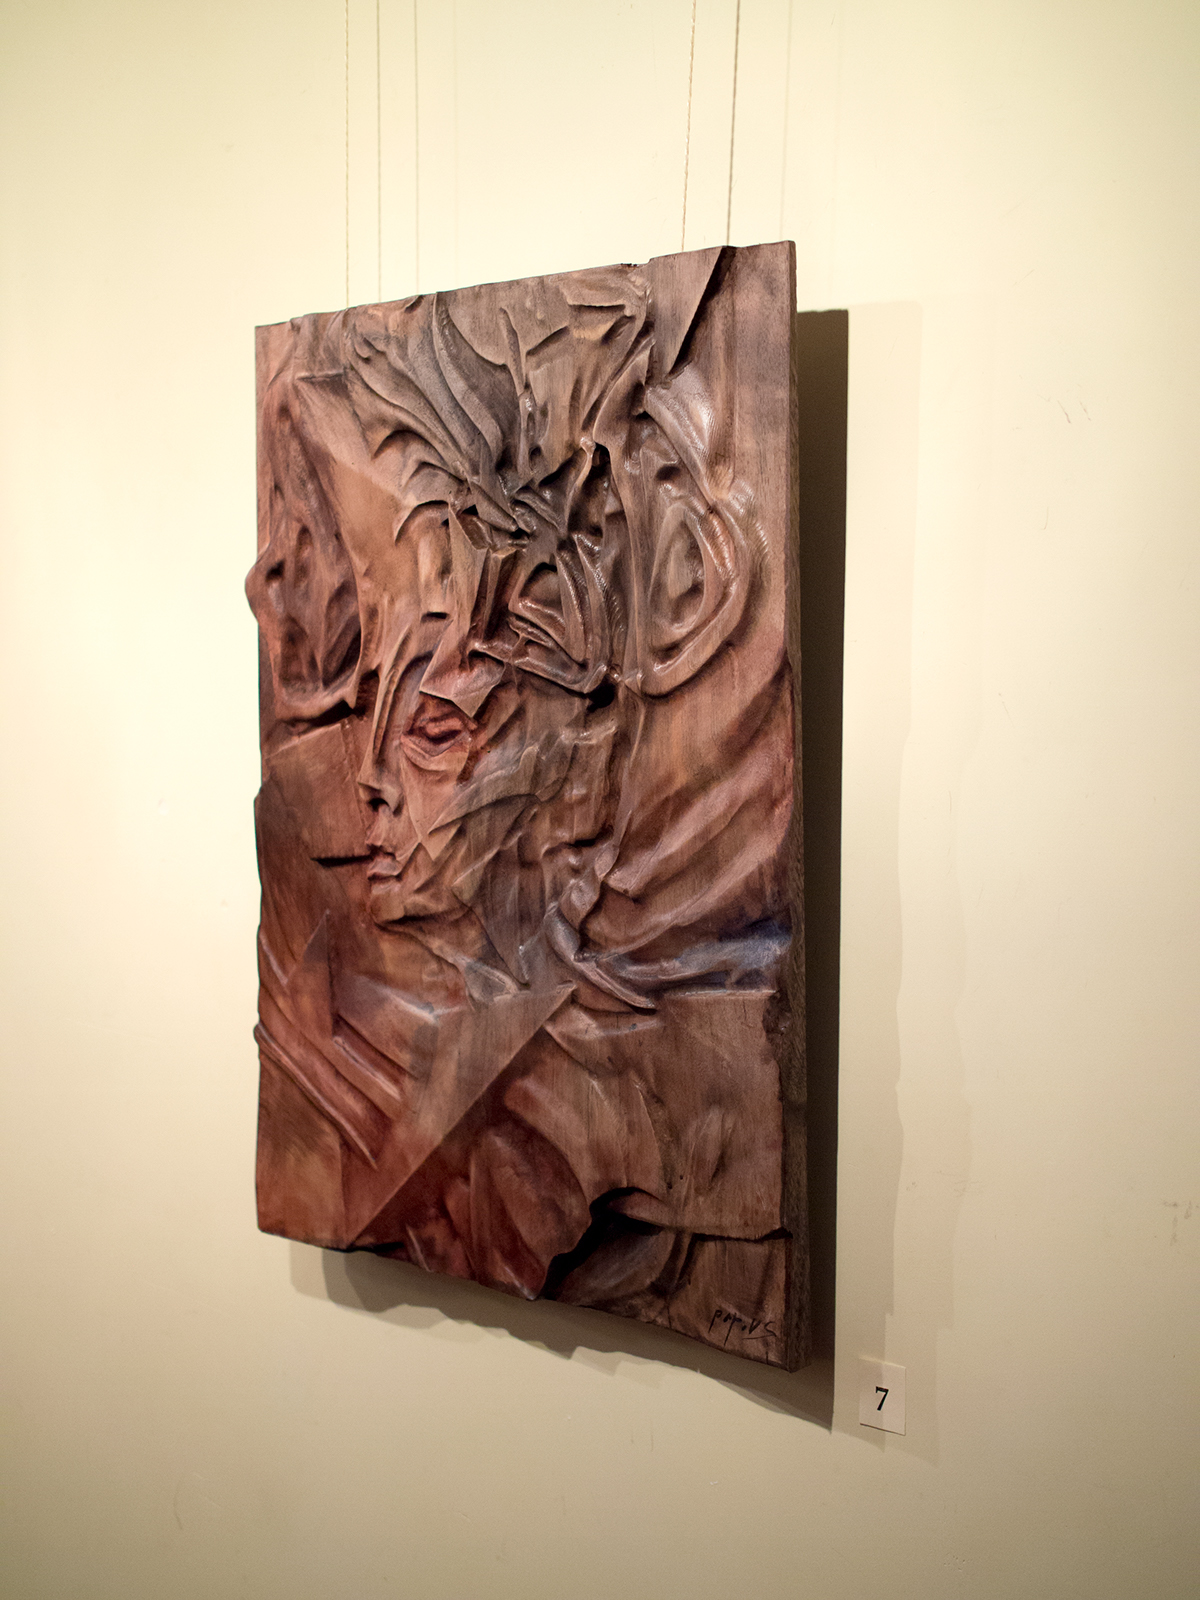 wooden bas-relief sculpture contemporary relief abstract woodcarving stanil popov wood